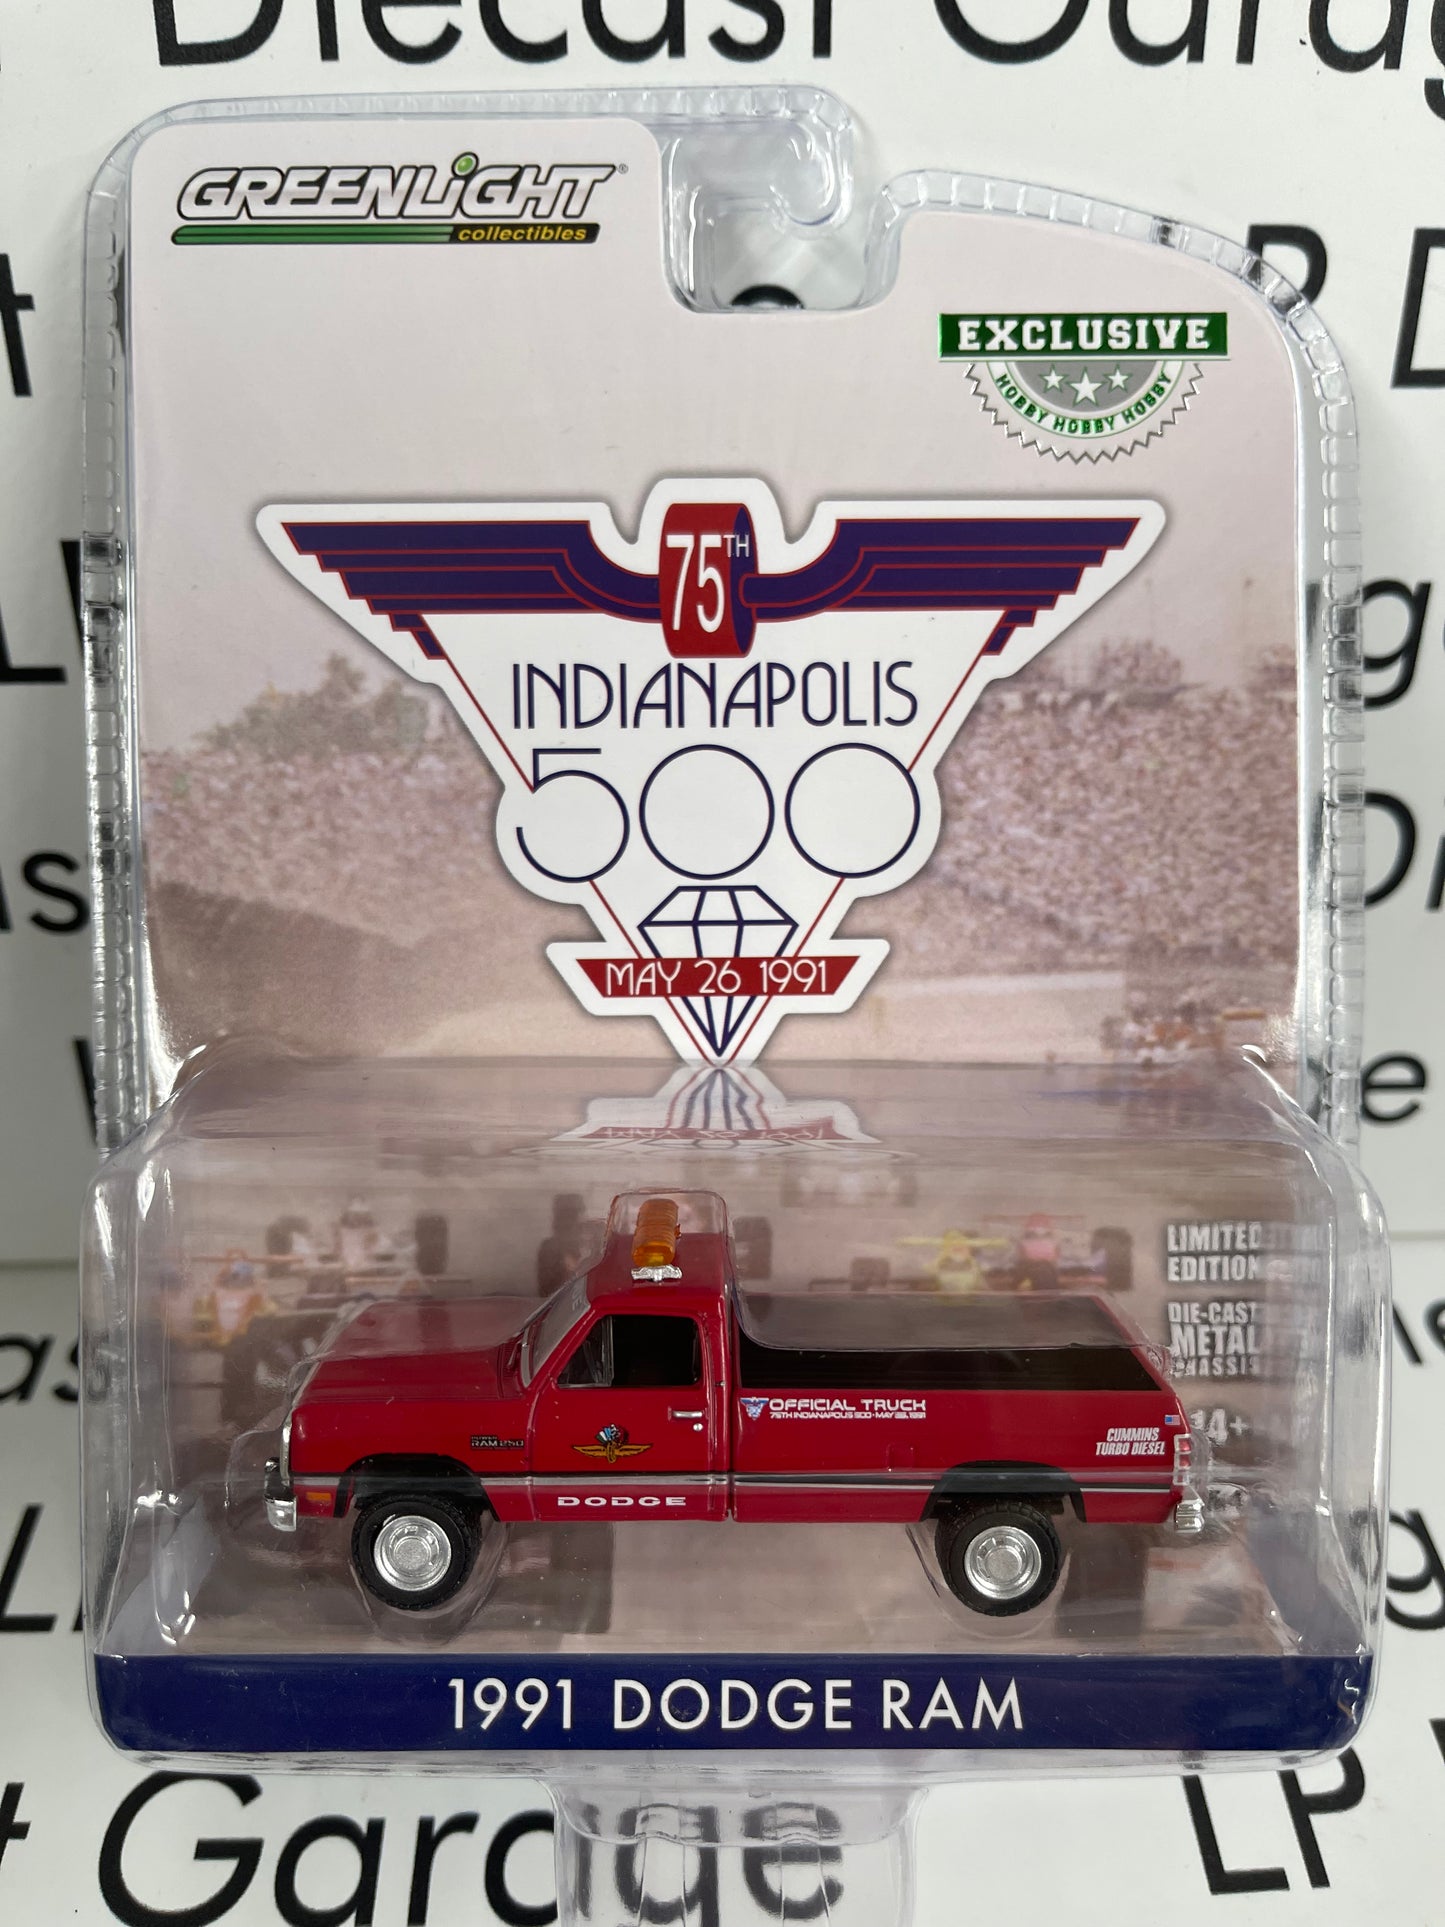 GREENLIGHT 1991 Dodge Ram Indianapolis 500 75TH Red Official Pace Truck 1:64 Diecast